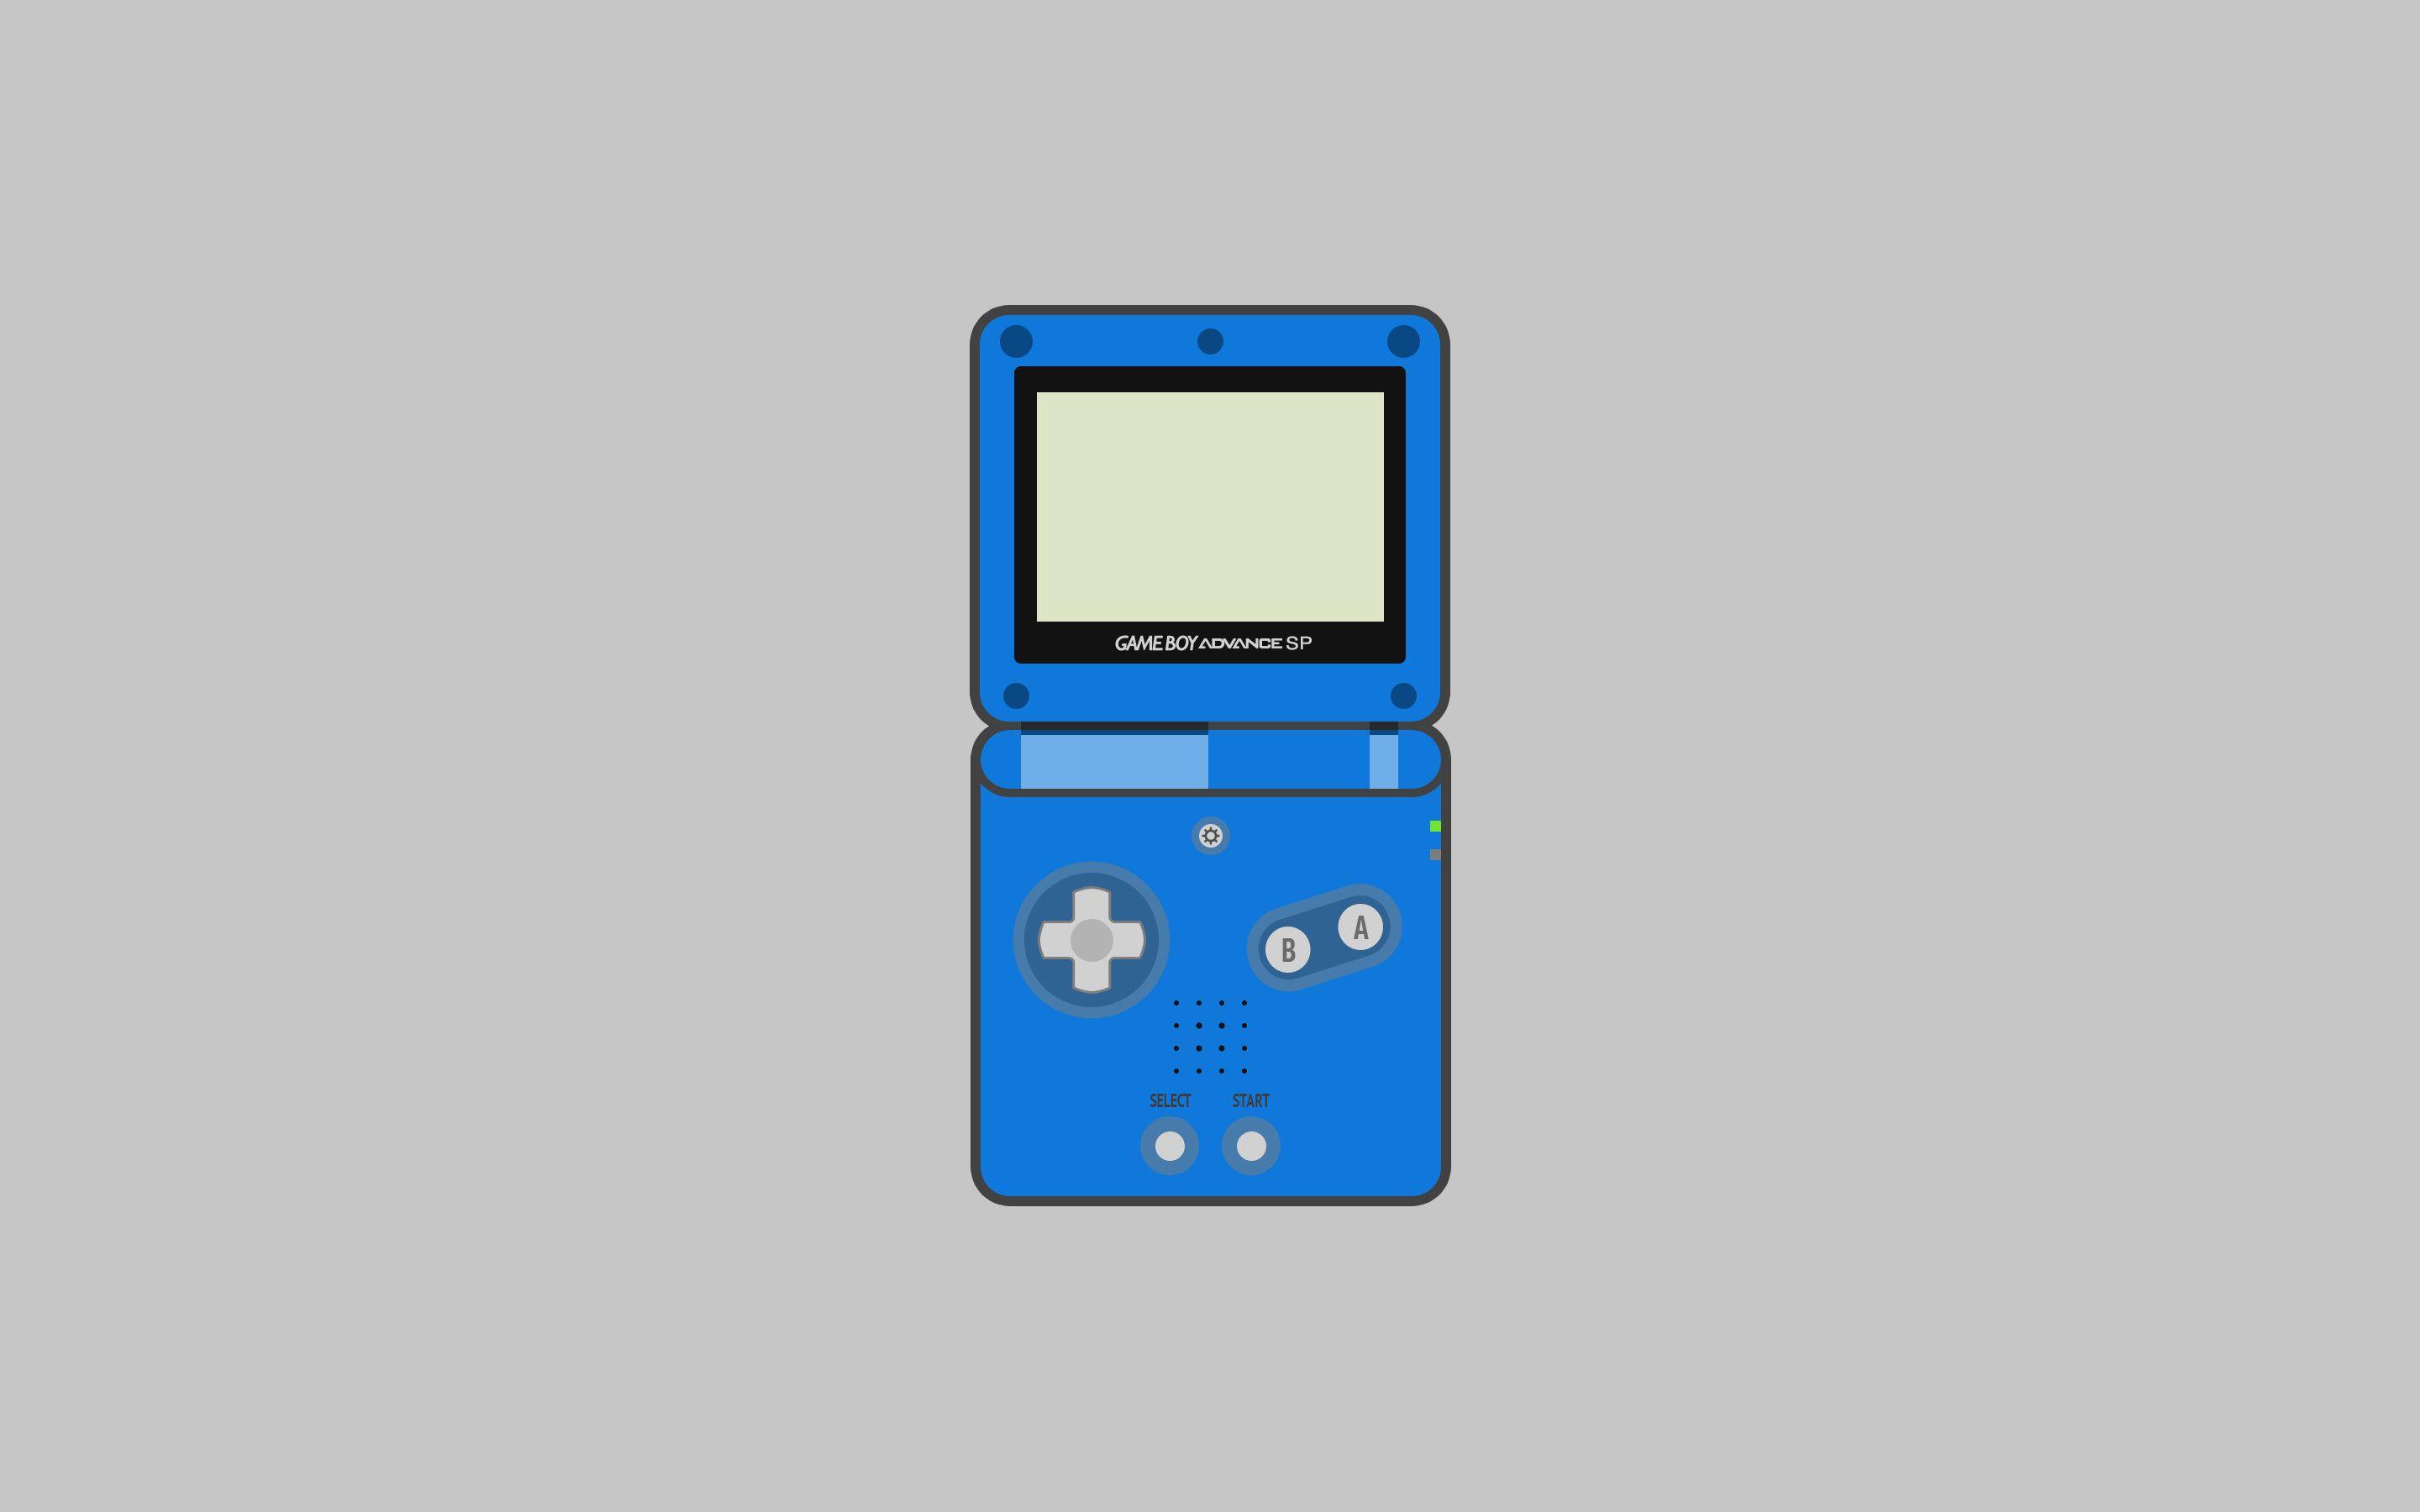 Game Boy Iphone Wallpapers Top Free Game Boy Iphone Backgrounds Wallpaperaccess